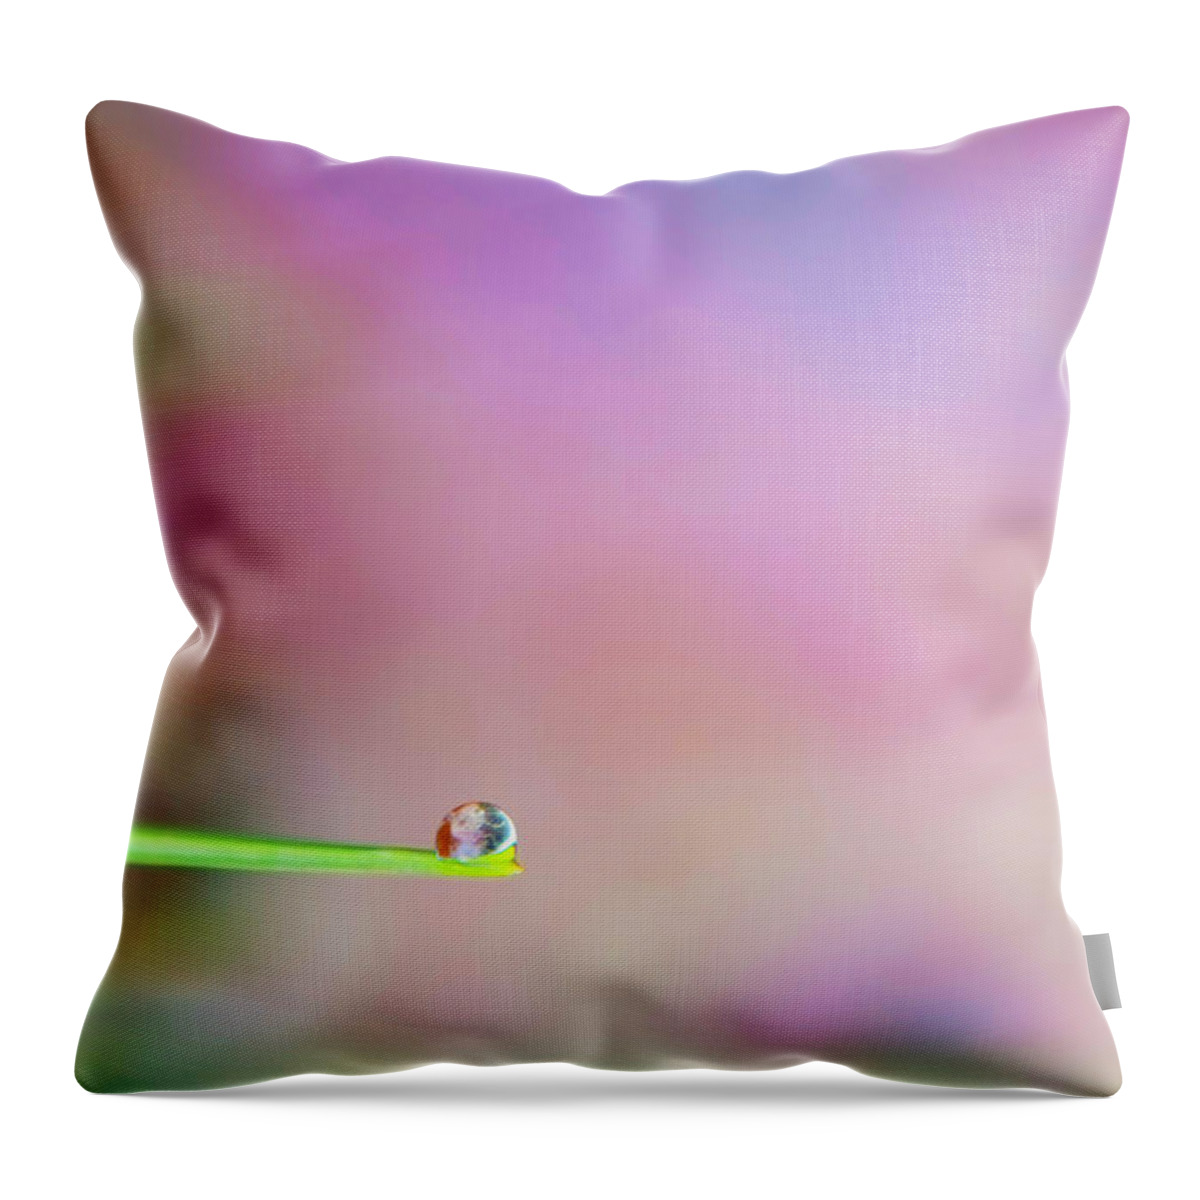 Mission Trails Throw Pillow featuring the photograph Water Droplet by Nicole Swanger